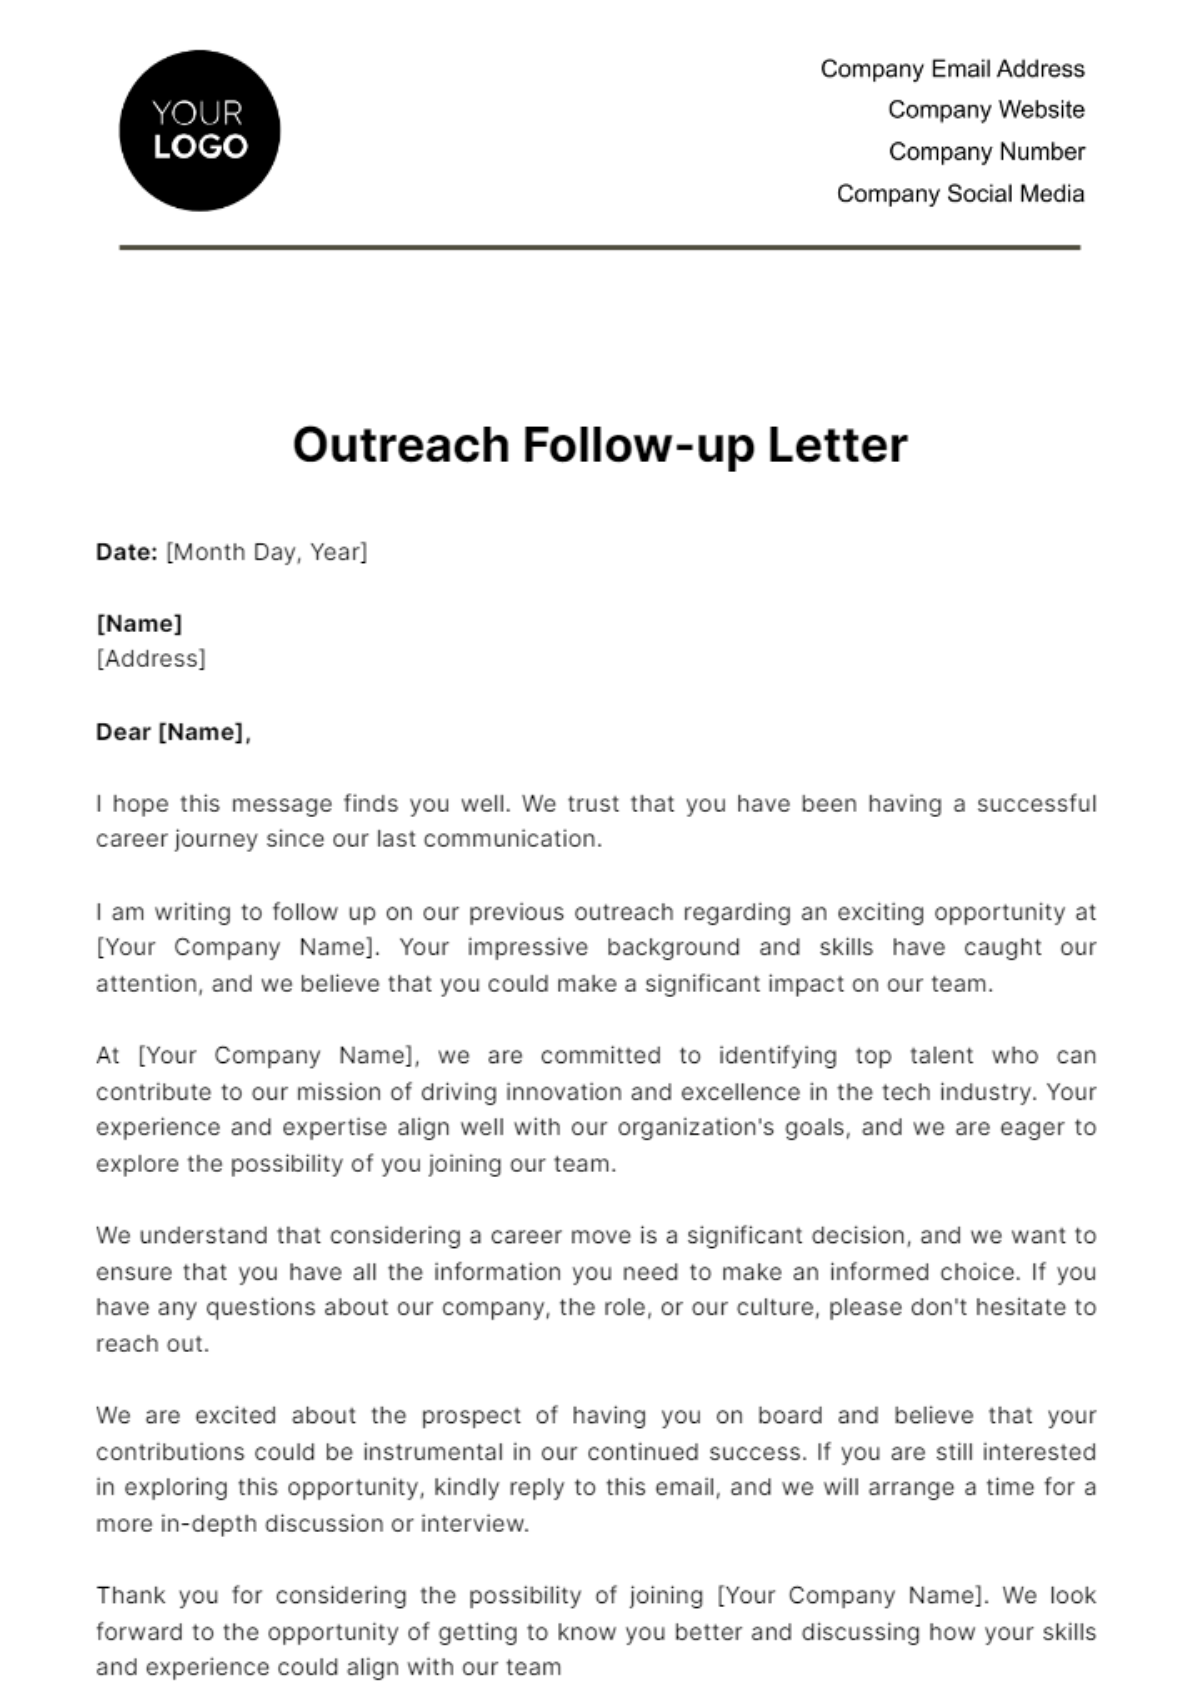 Free Outreach Follow-up Letter HR Template